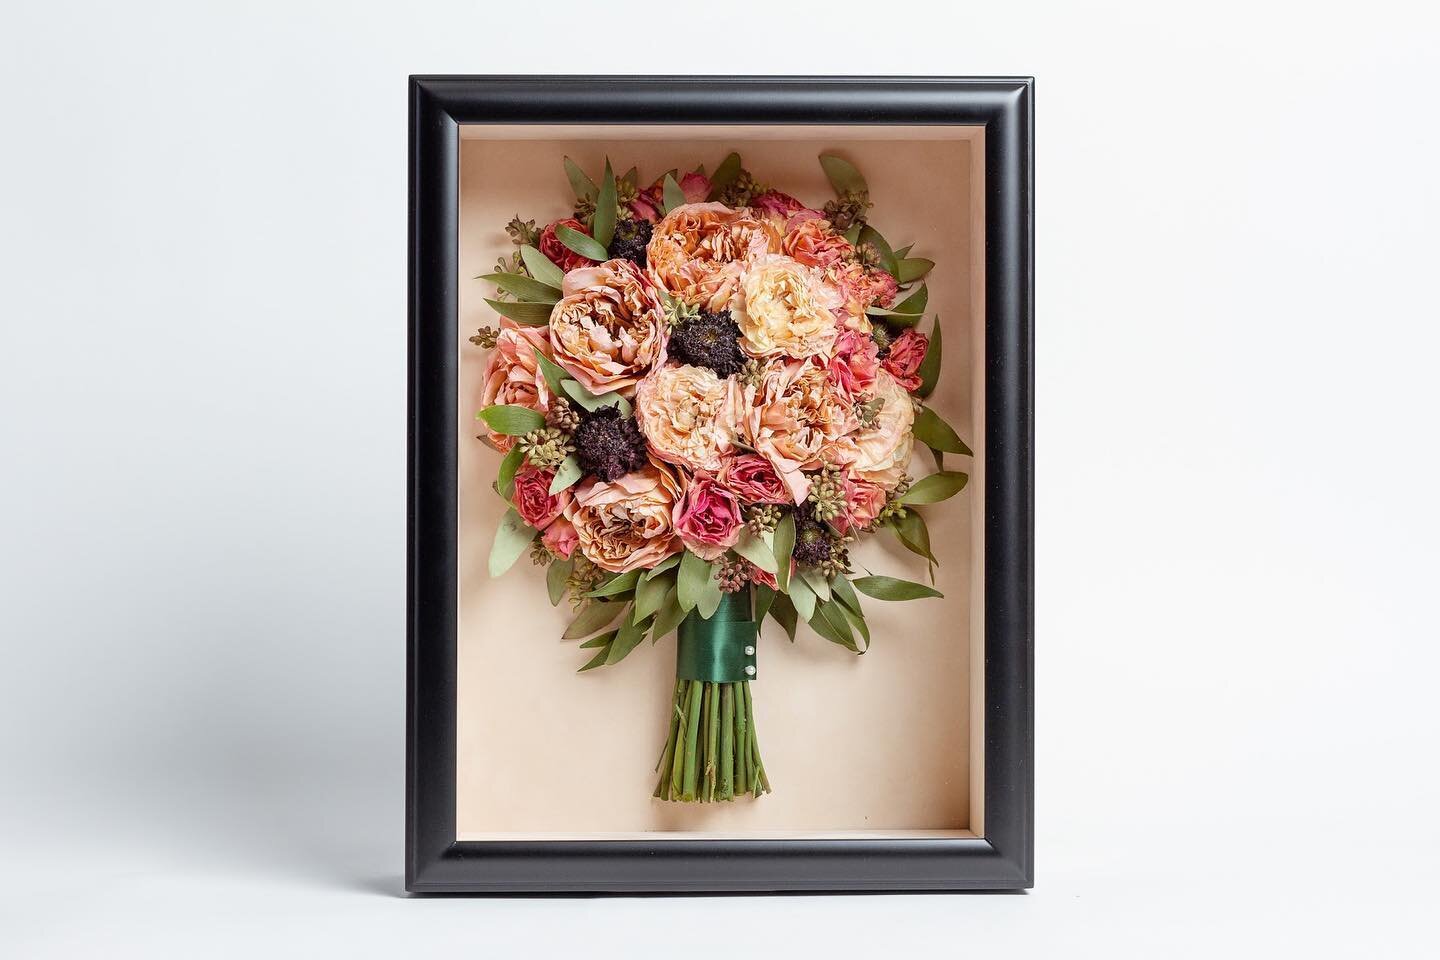 Save your bouquet! 💐 for more information about our services check out our website @ Fleuraflair.com &bull;
&bull;
Pictured: full bouquet preservation, recreated bouquet in a black Shadowbox with Blush suede backing. #fleuraflair